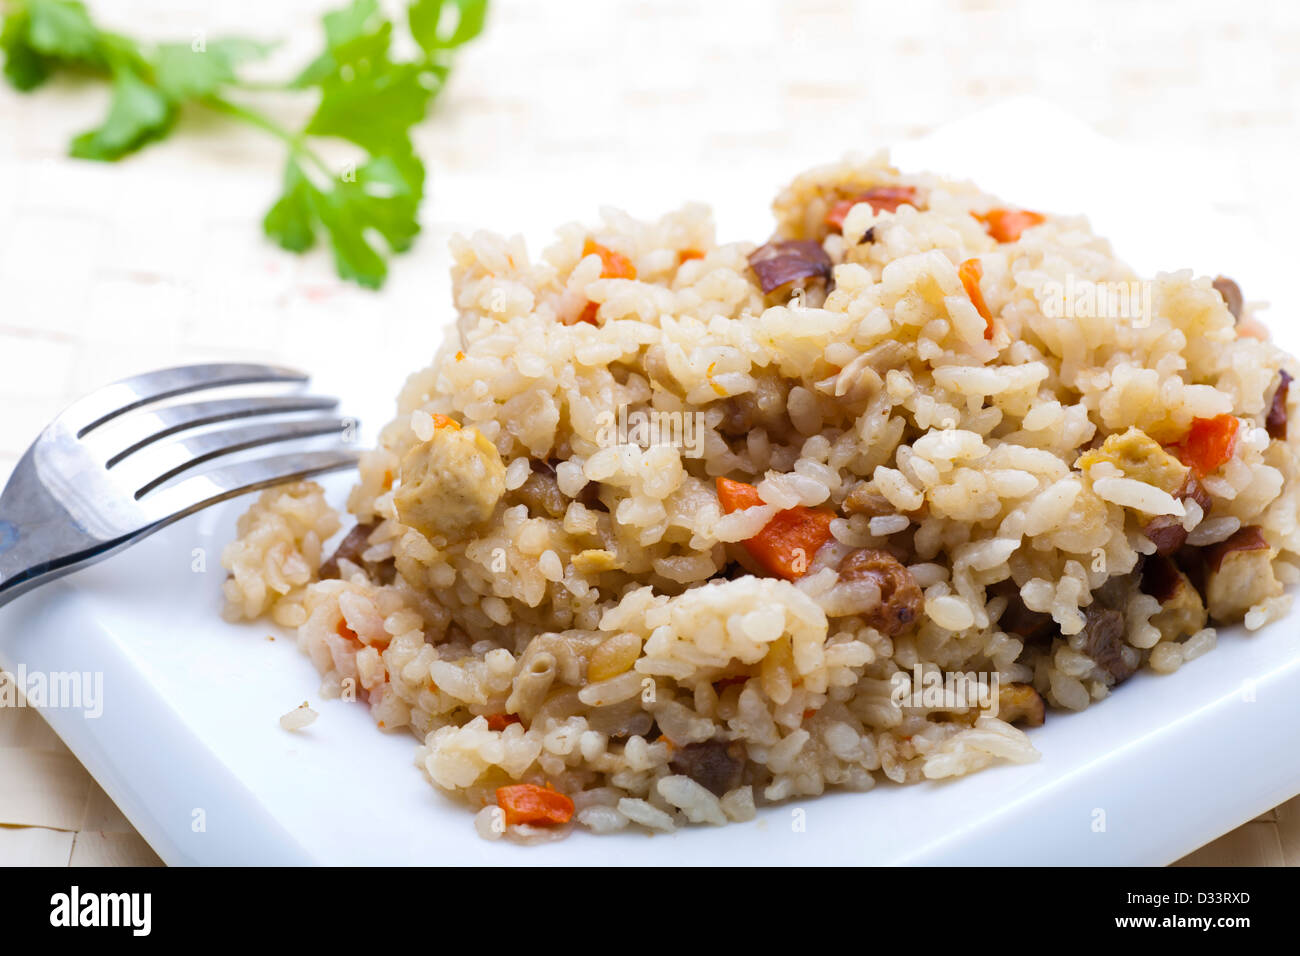 A plate of fried rice. Stock Photo